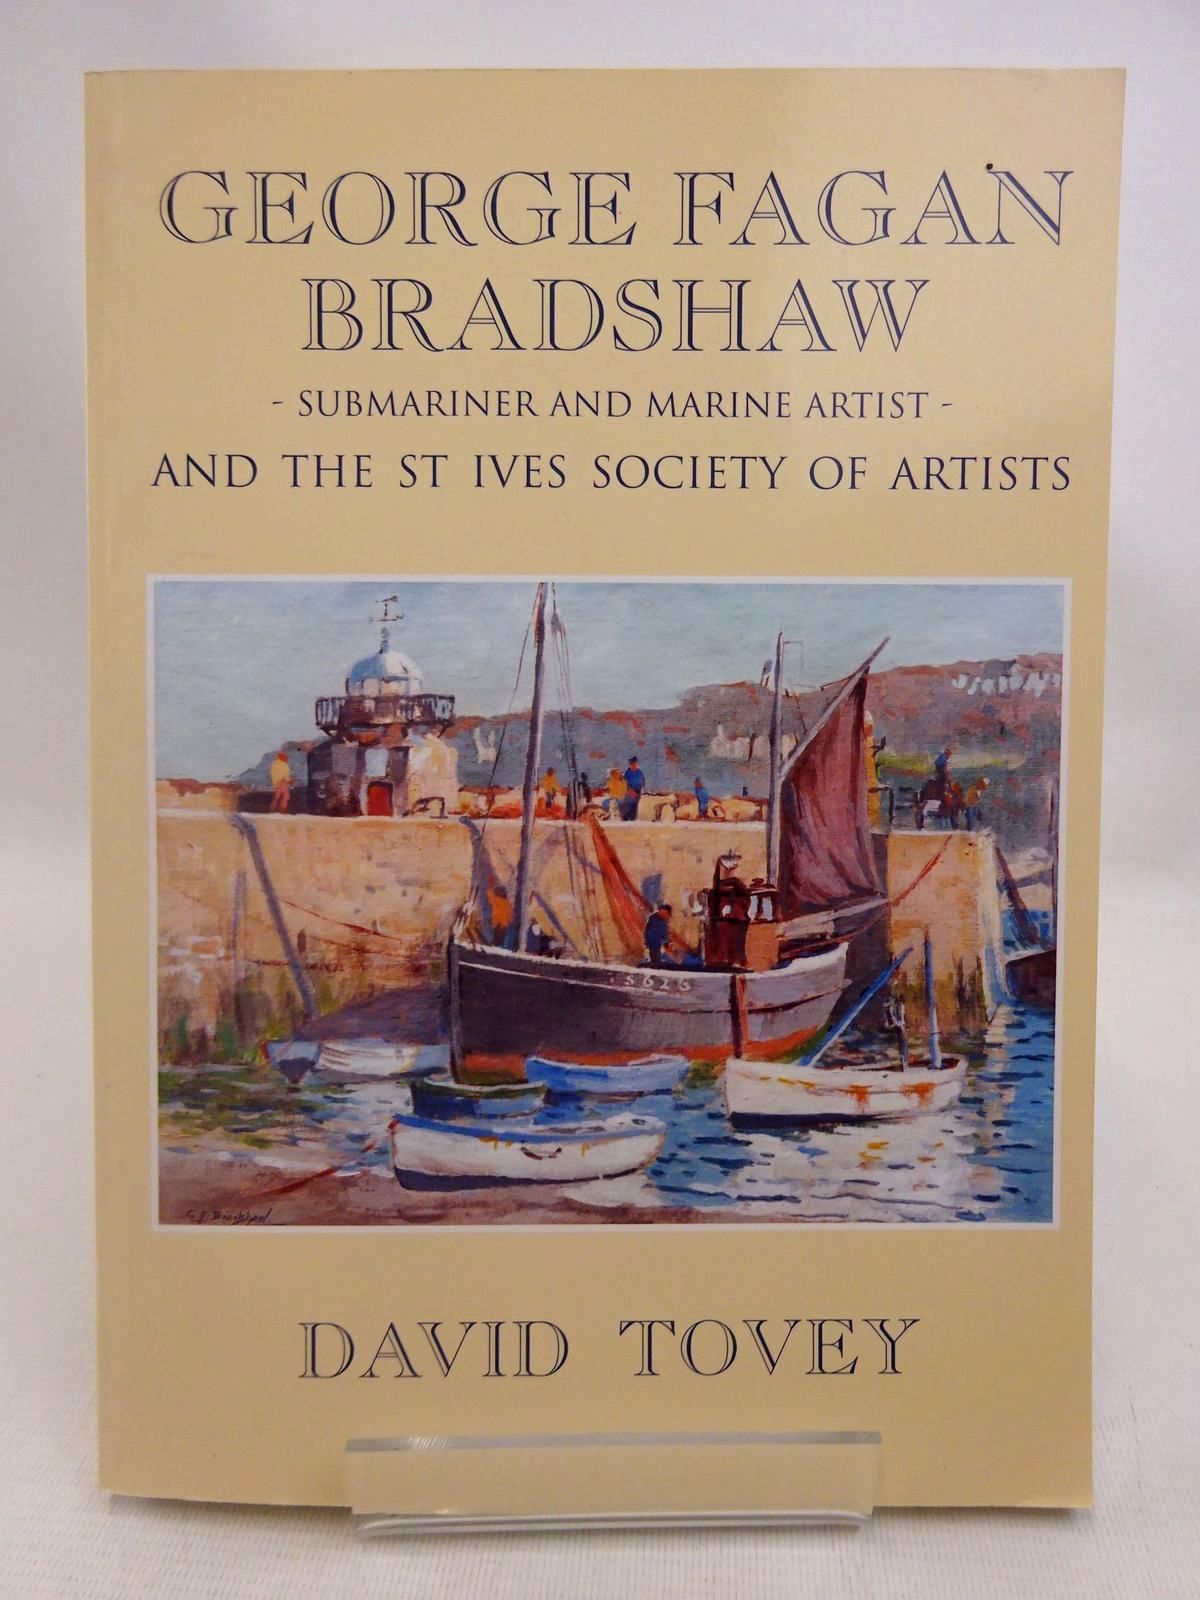 TOVEY, DAVID ILLUSTRATED BY BRADSHAW, GEORGE FAGAN - George Fagan Bradshaw - Submariner and Marine Artist - And the St Ives Society of Artists